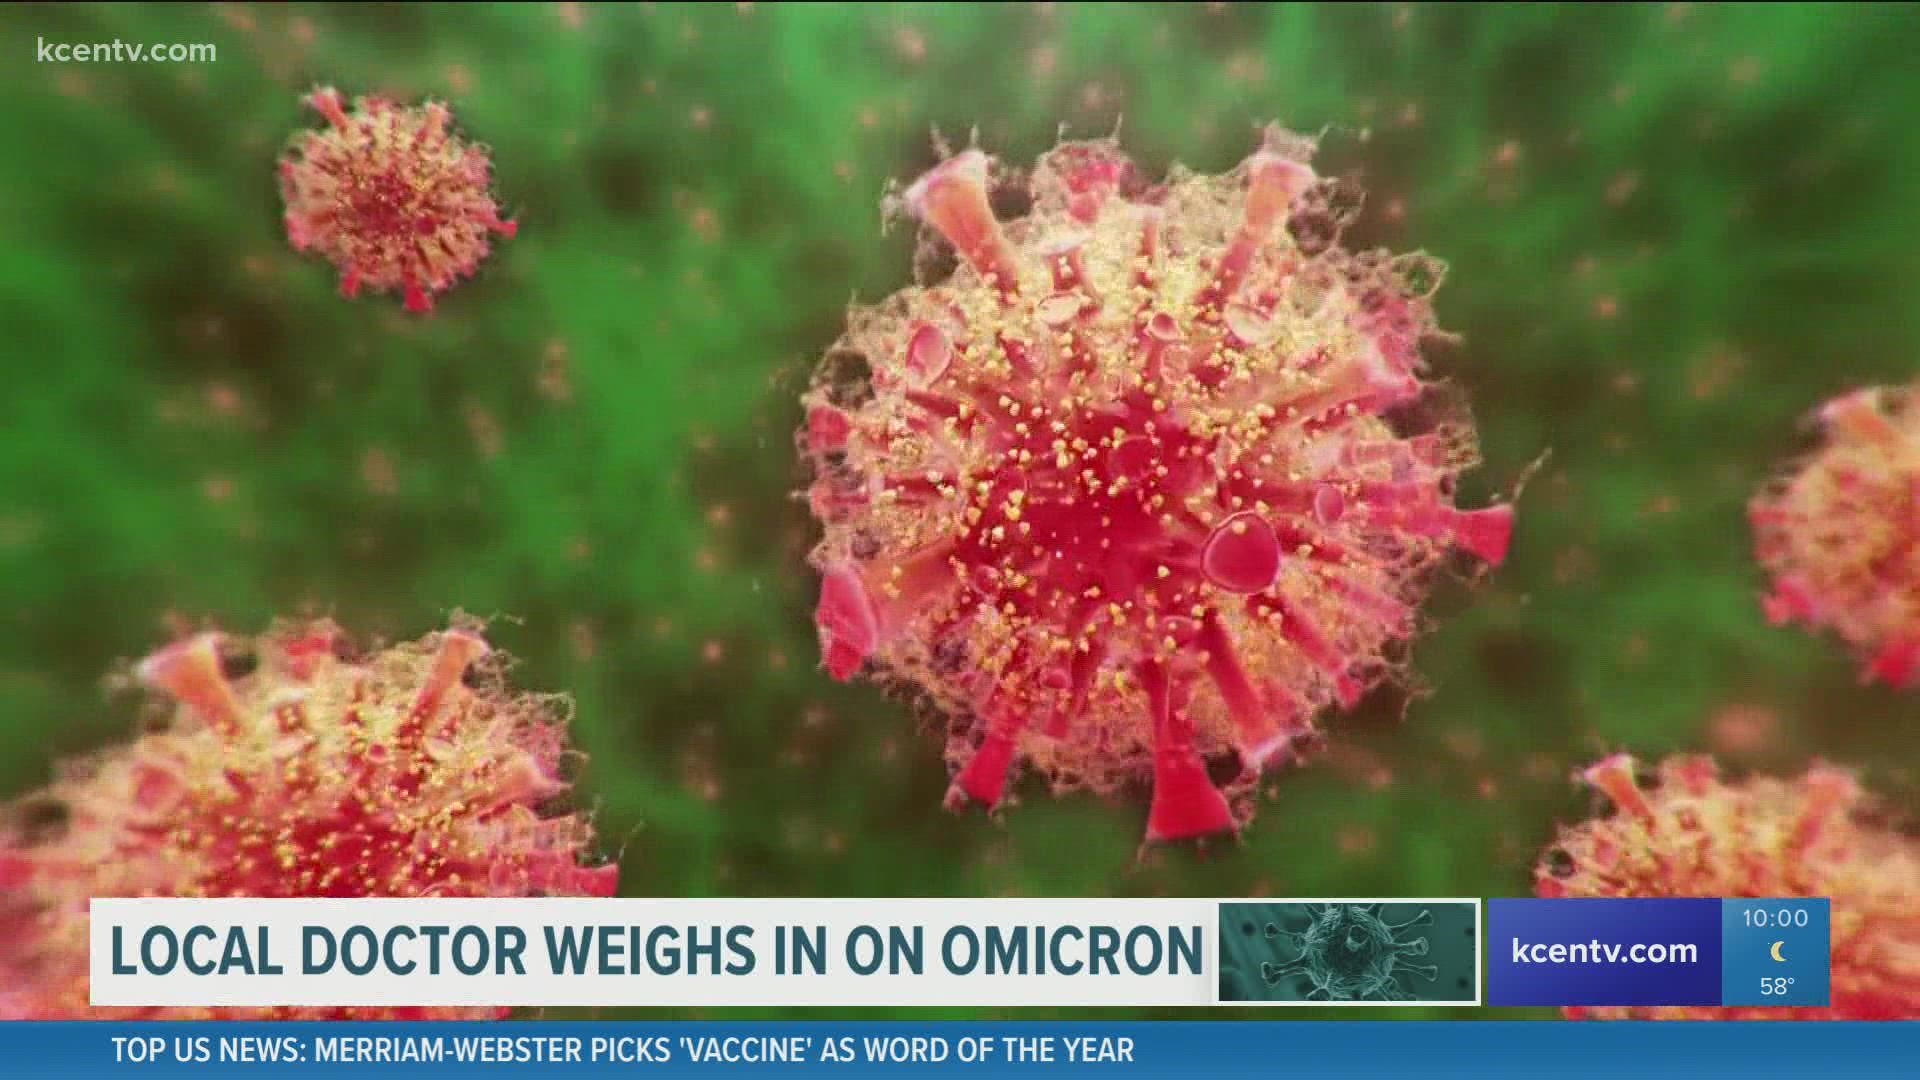 Health experts said the new variant called Omicron is a cause for concern, but not panic.